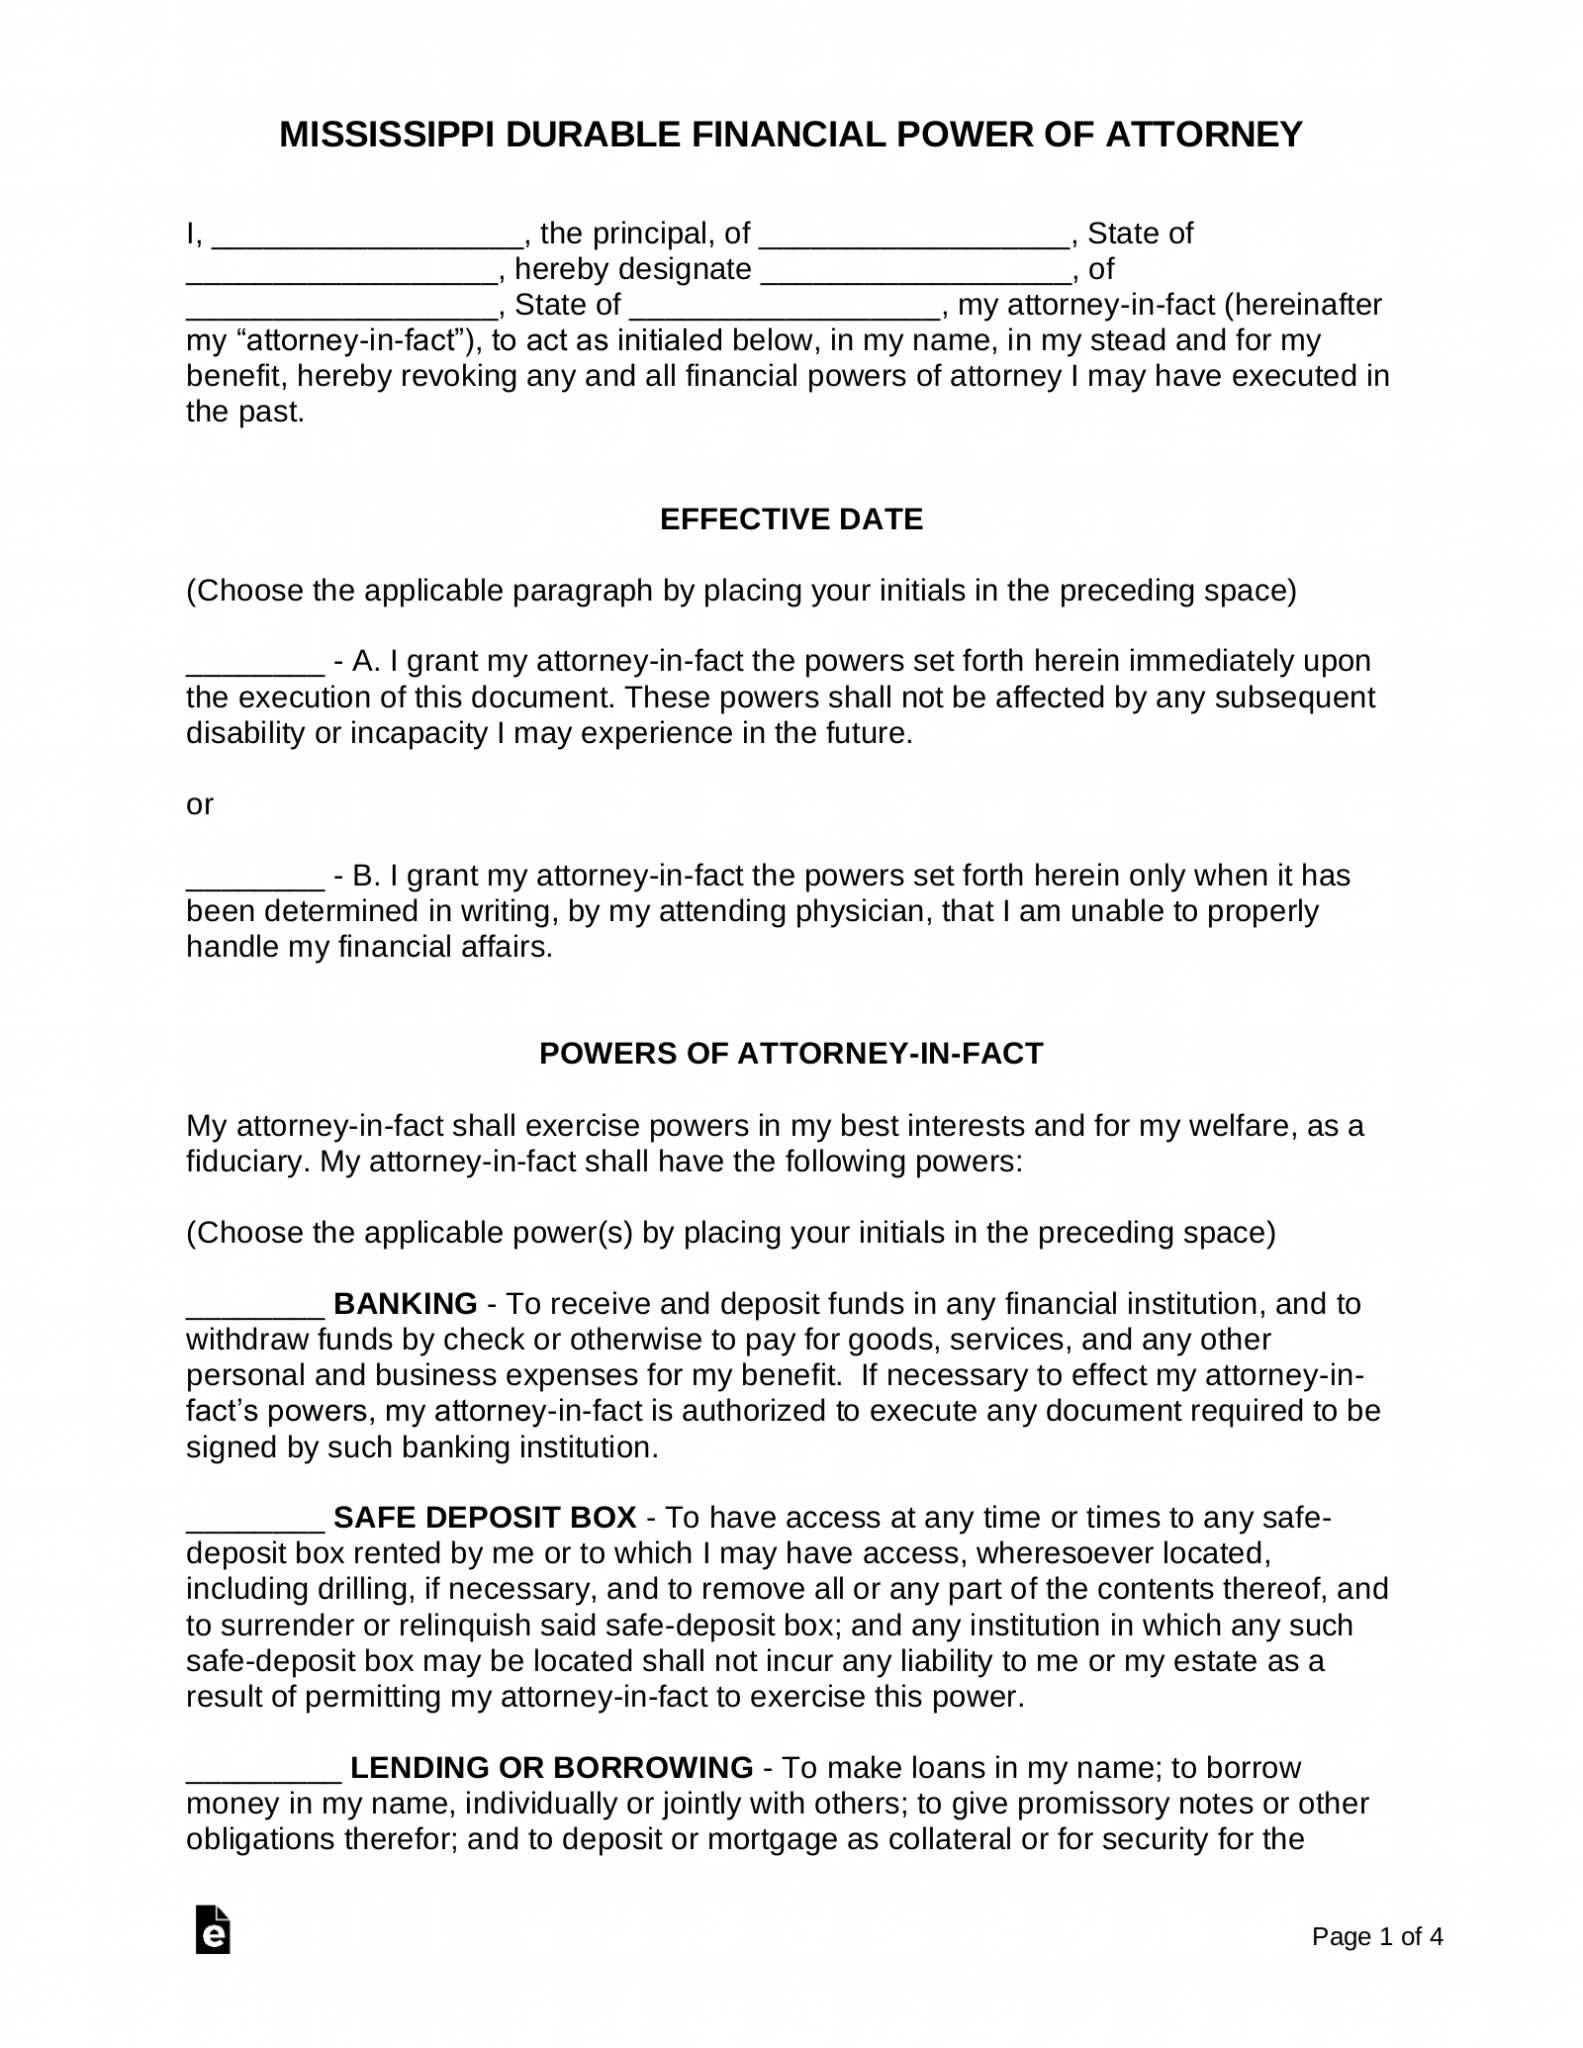 Free Mississippi Durable Financial Power Of Attorney Form PDF 